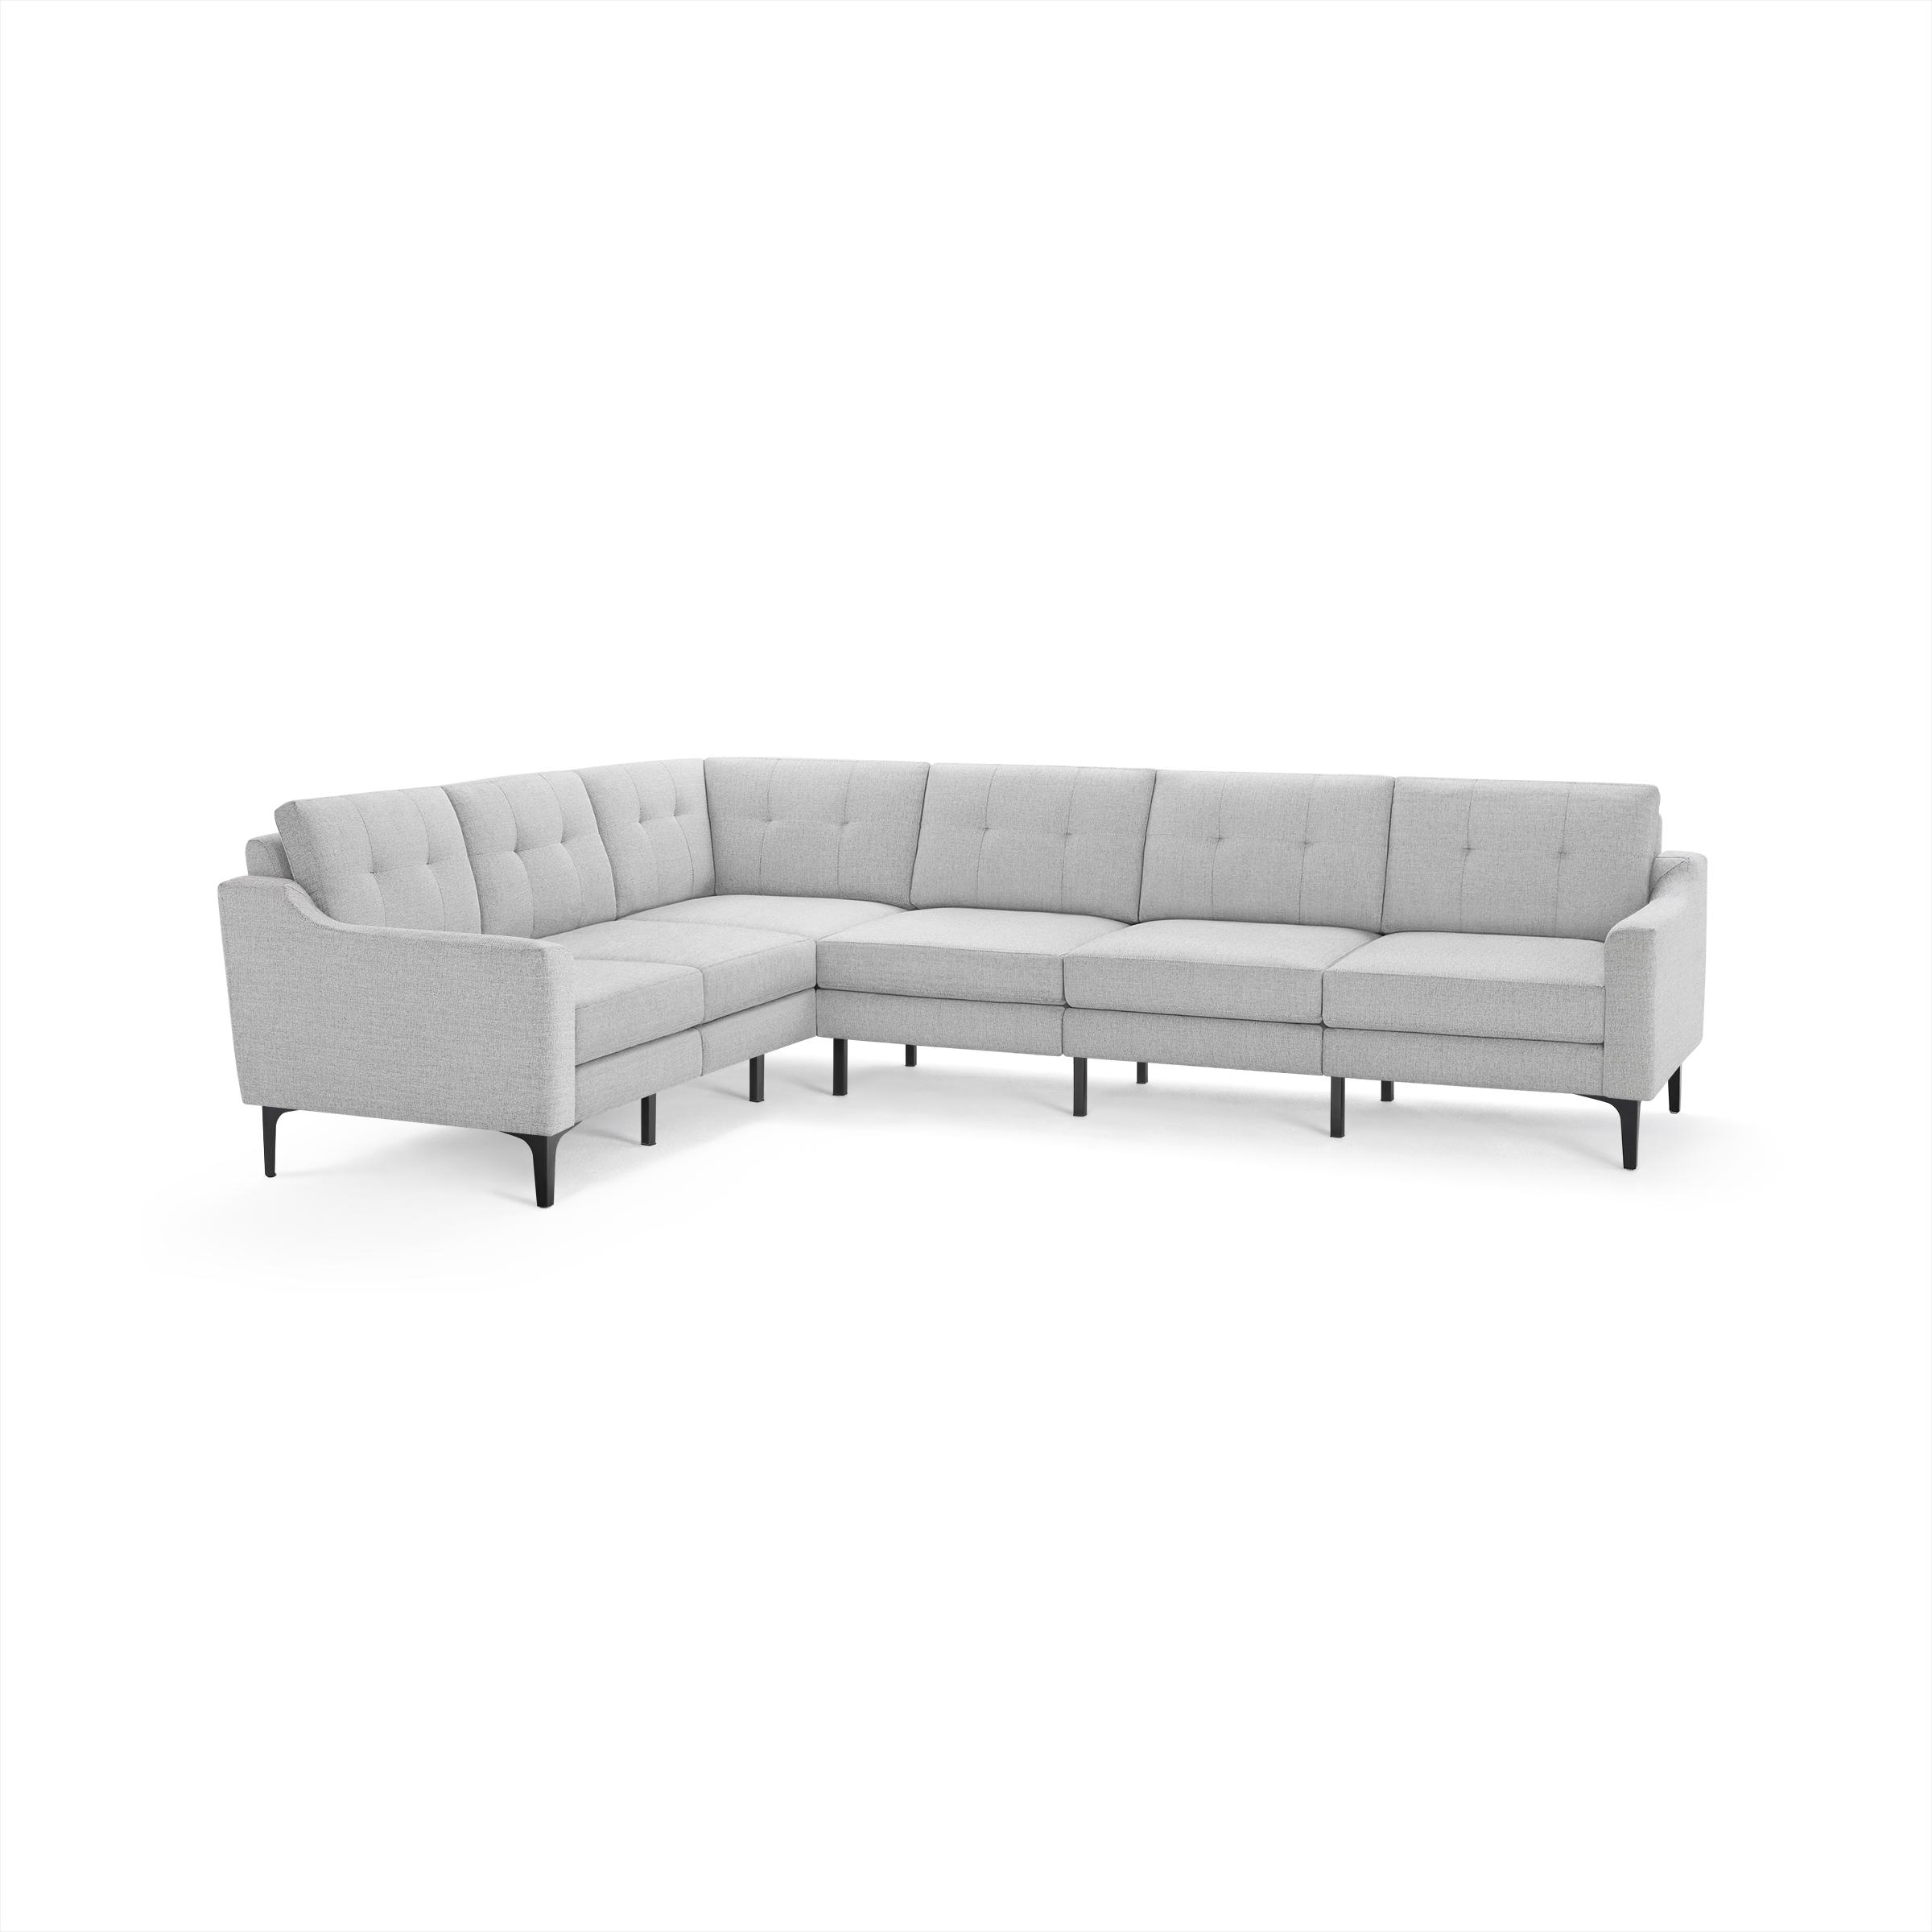 The Slope Nomad 6-Seat Corner Sectional in Crushed Gravel - Image 0